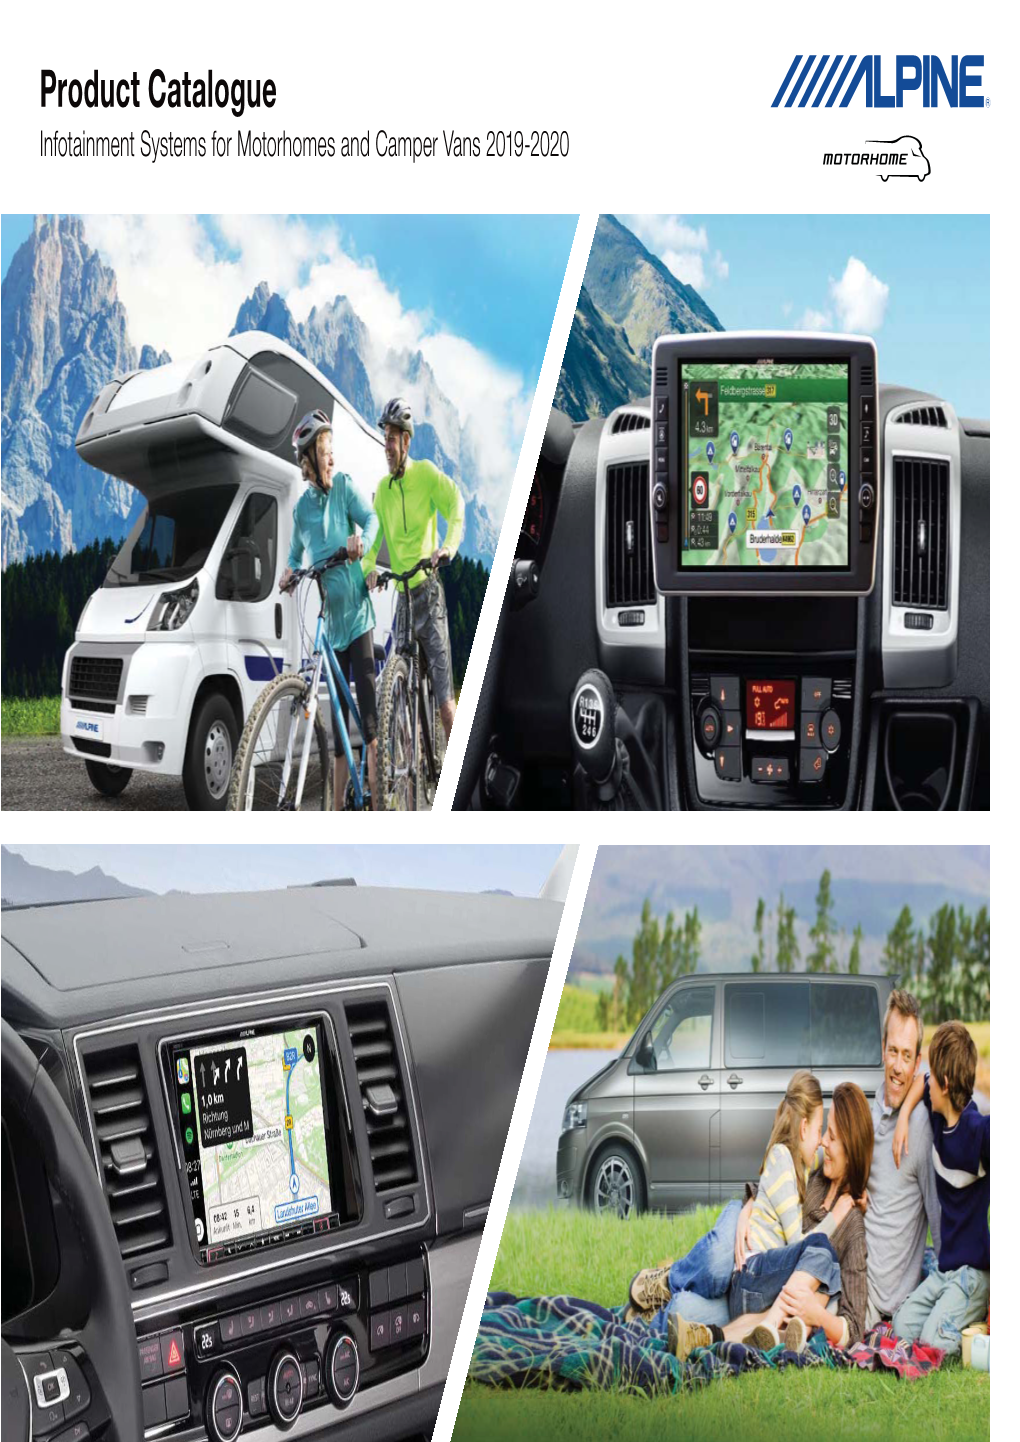 Product Catalogue Infotainment Systems for Motorhomes and Camper Vans 2019-2020 Discover the Alpine Product Categories for Your Motorhome